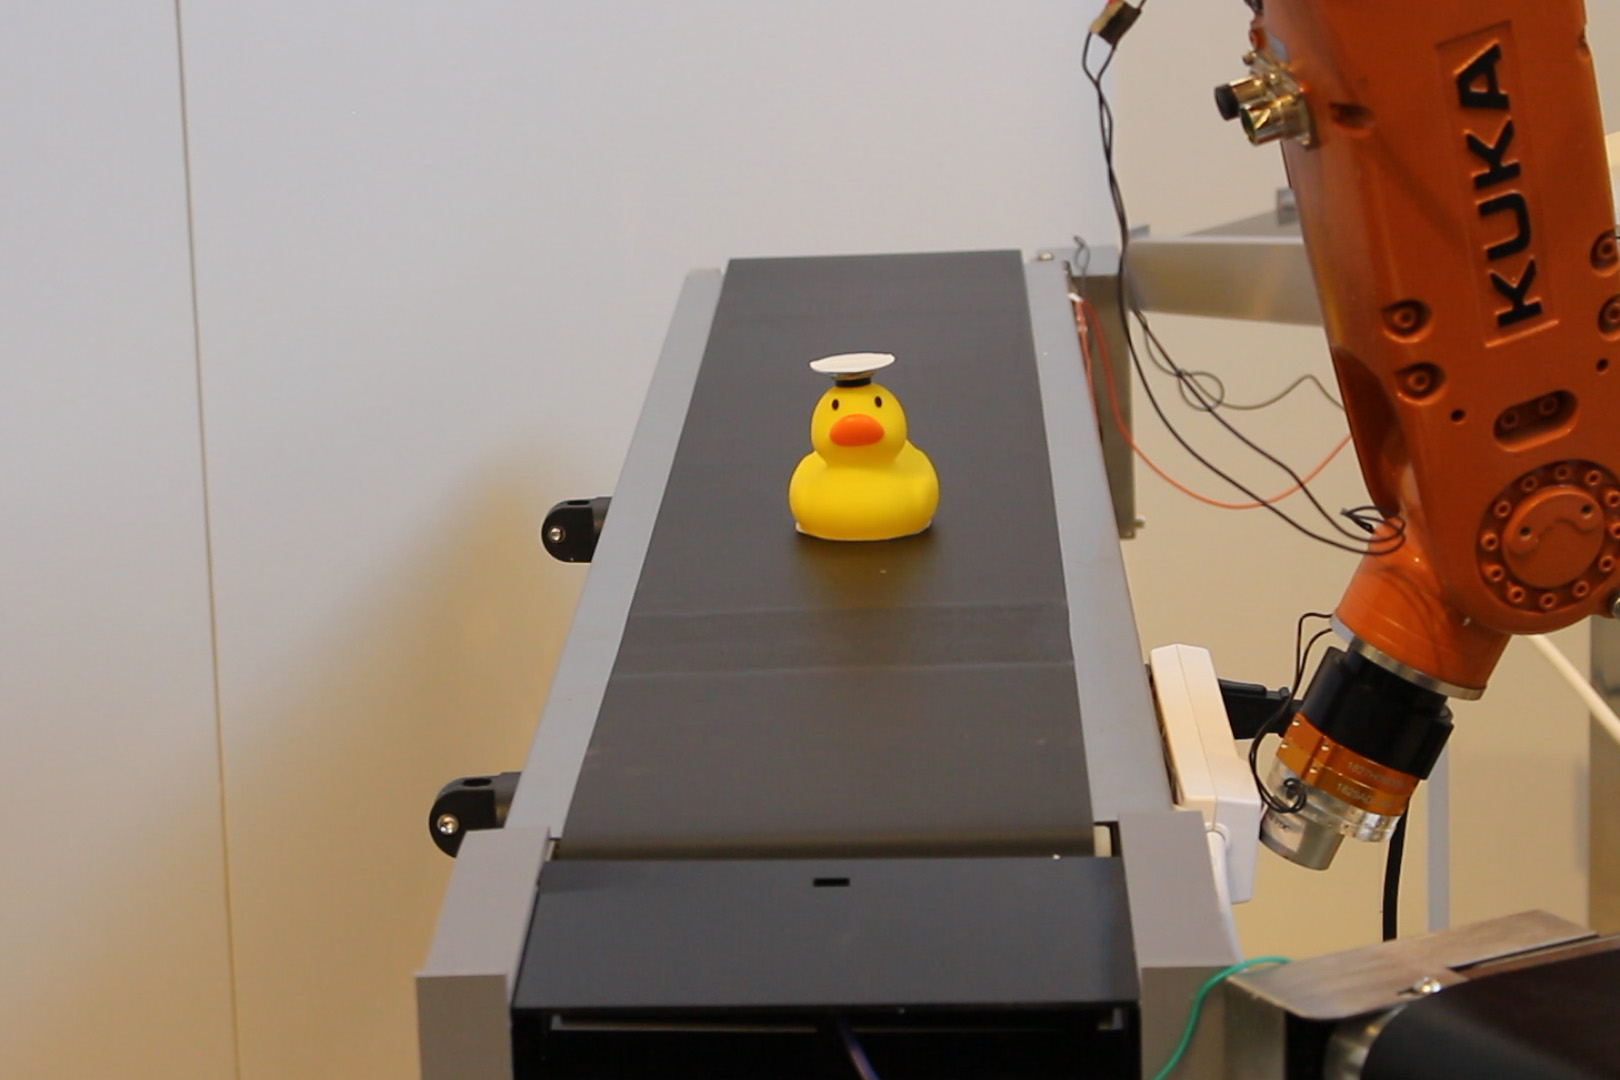 A yellow duck on a conveyor belt. There is a white circular device on top of the duck's head. 